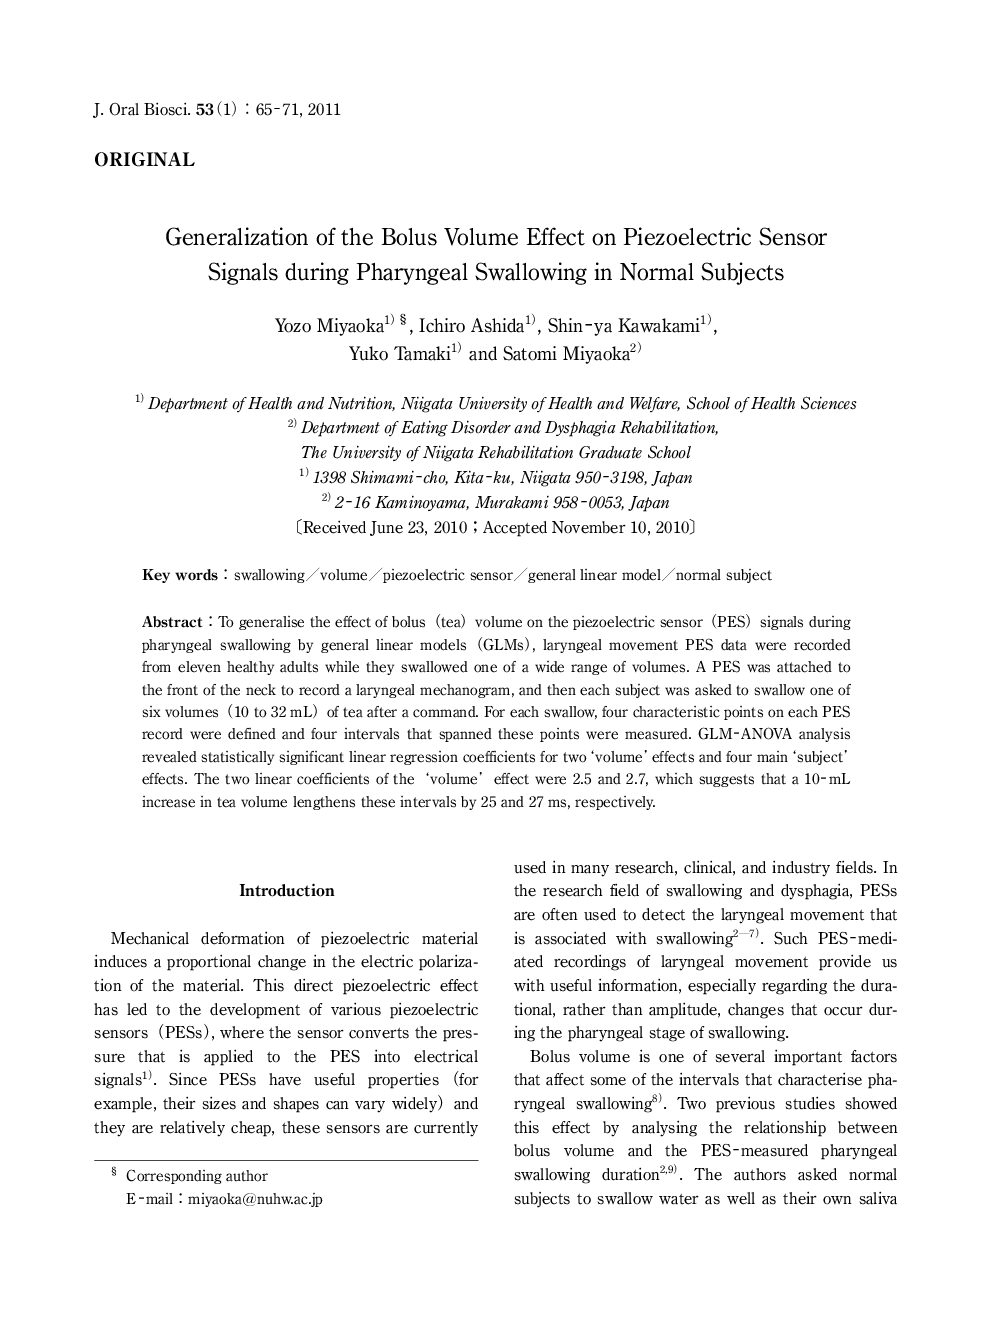 Generalization of the Bolus Volume Effect on Piezoelectric Sensor Signals during Pharyngeal Swallowing in Normal Subjects